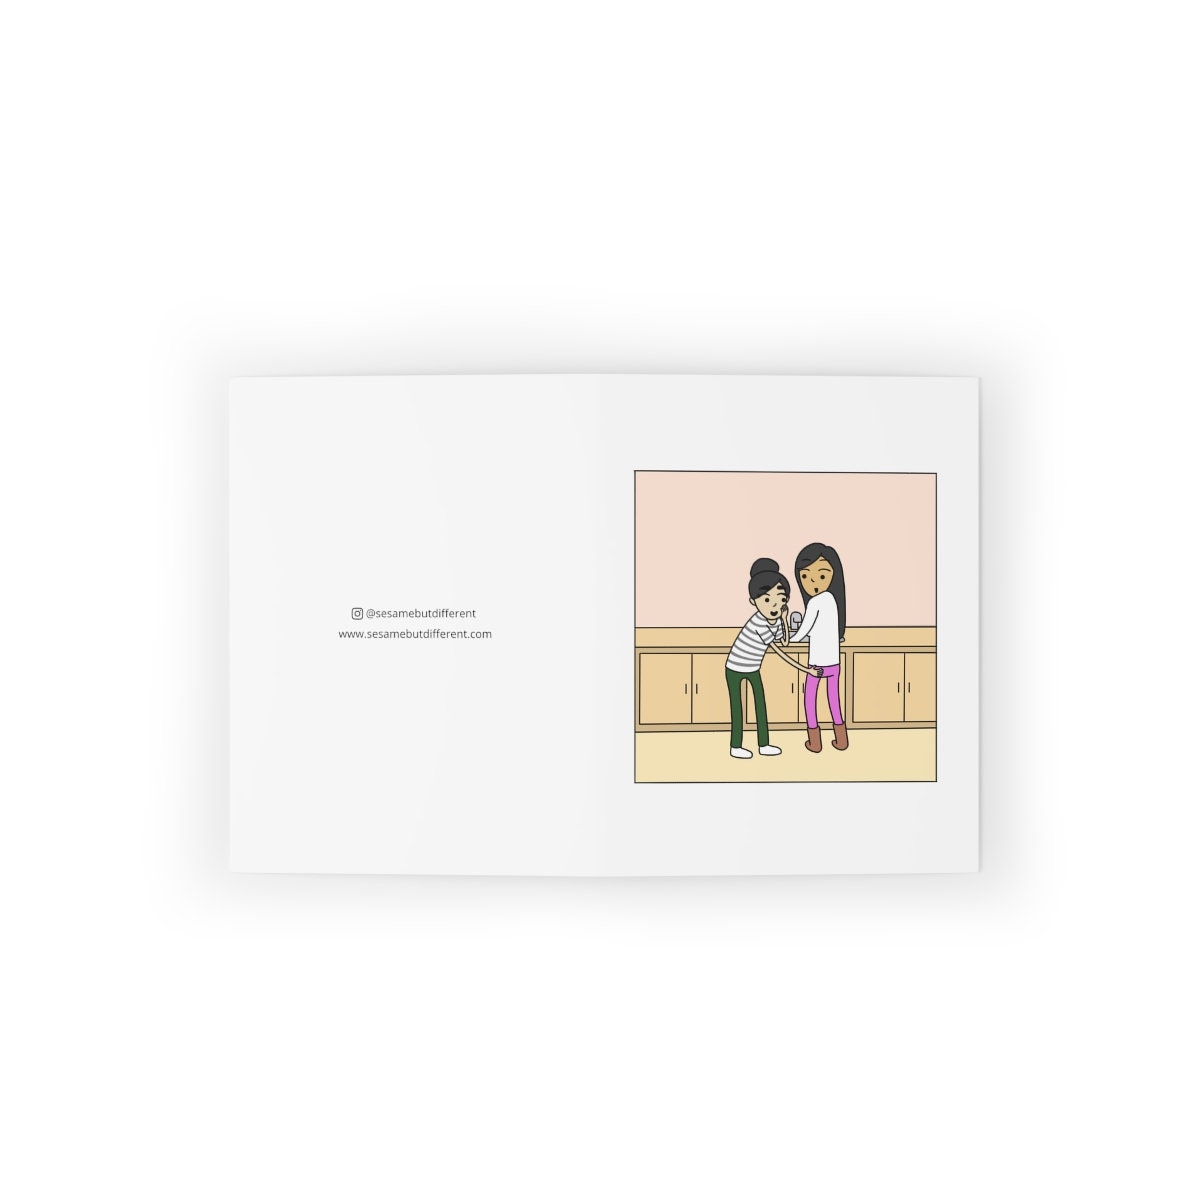 You're My Main Squeeze | Funny Punny Lesbian Card | Cute LGBTQ Valentine's Day or Anniversary Gift | WLW Humor | Sapphic Love Greeting Card